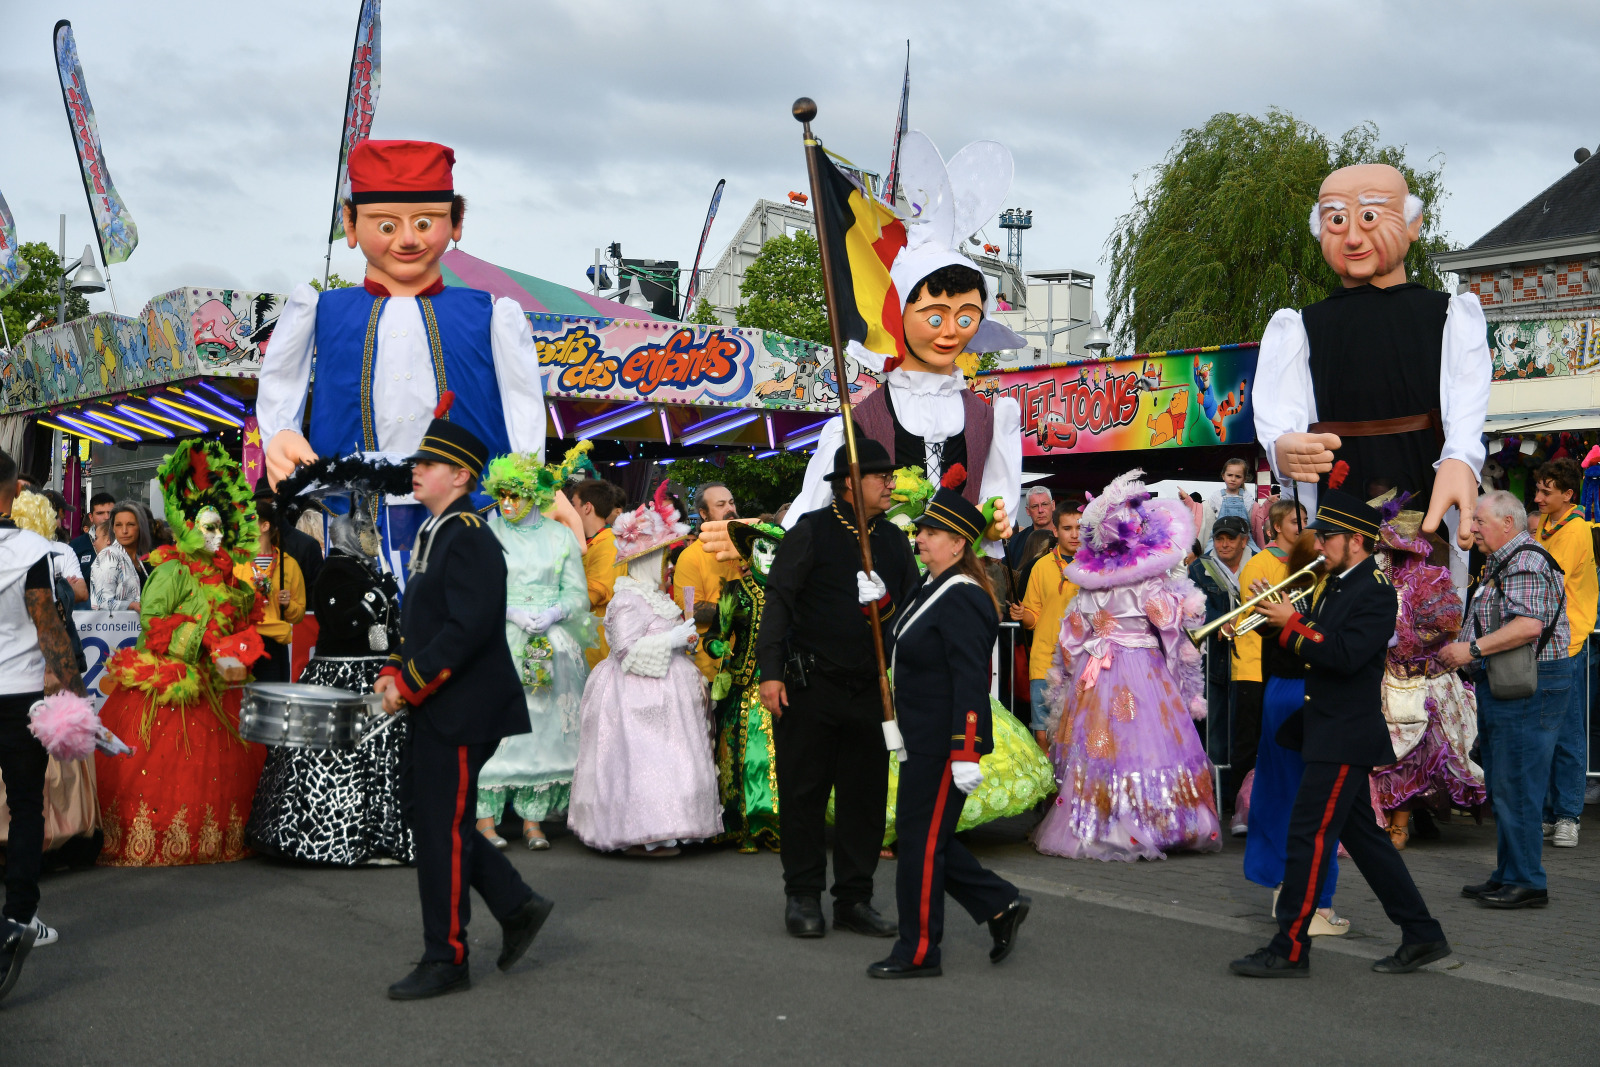 Procession of costumed people and giant puppets following a trumpeter and a drummer